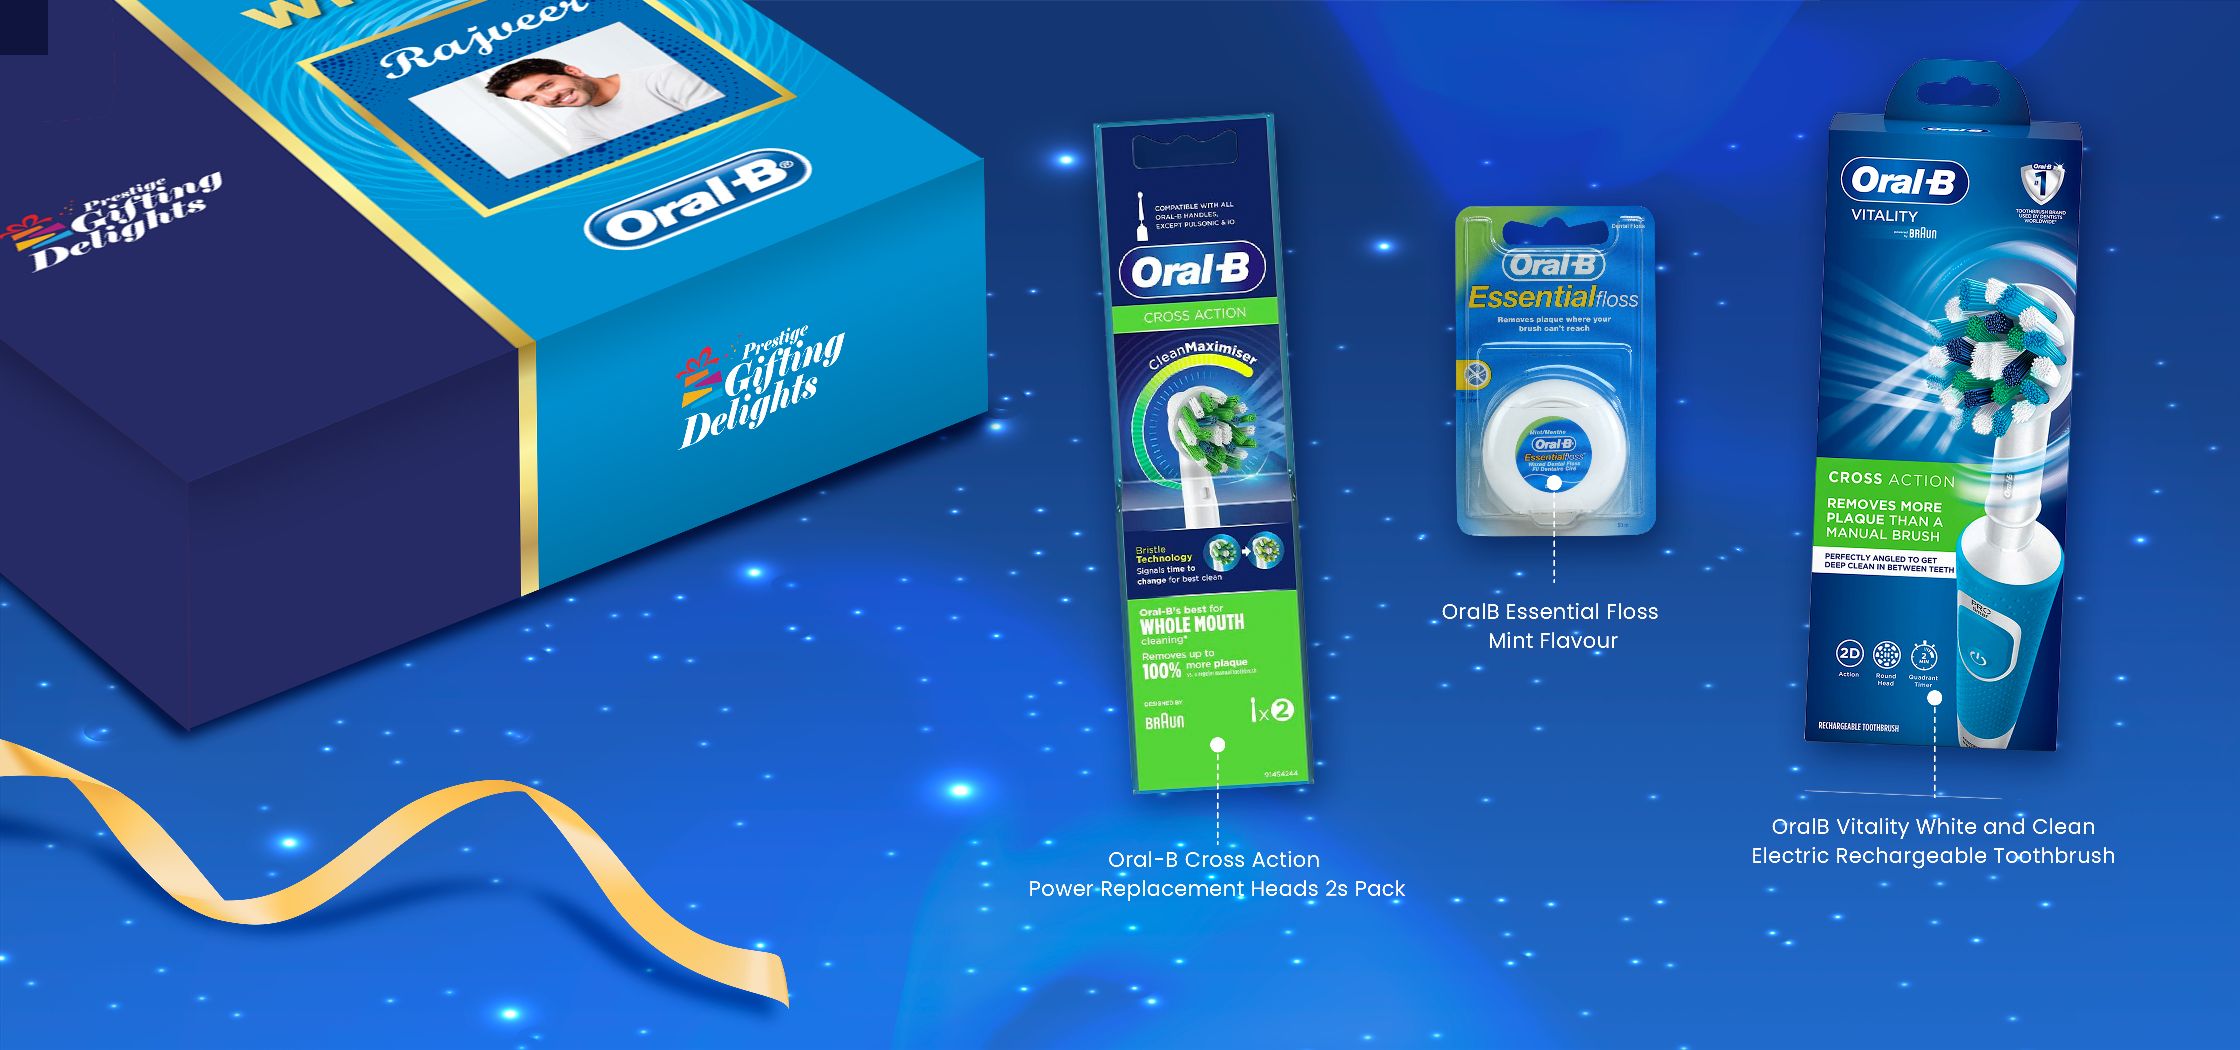 Oral-B Vitality Electric Toothbrush for Bright Beginning Thank you Gift Pack